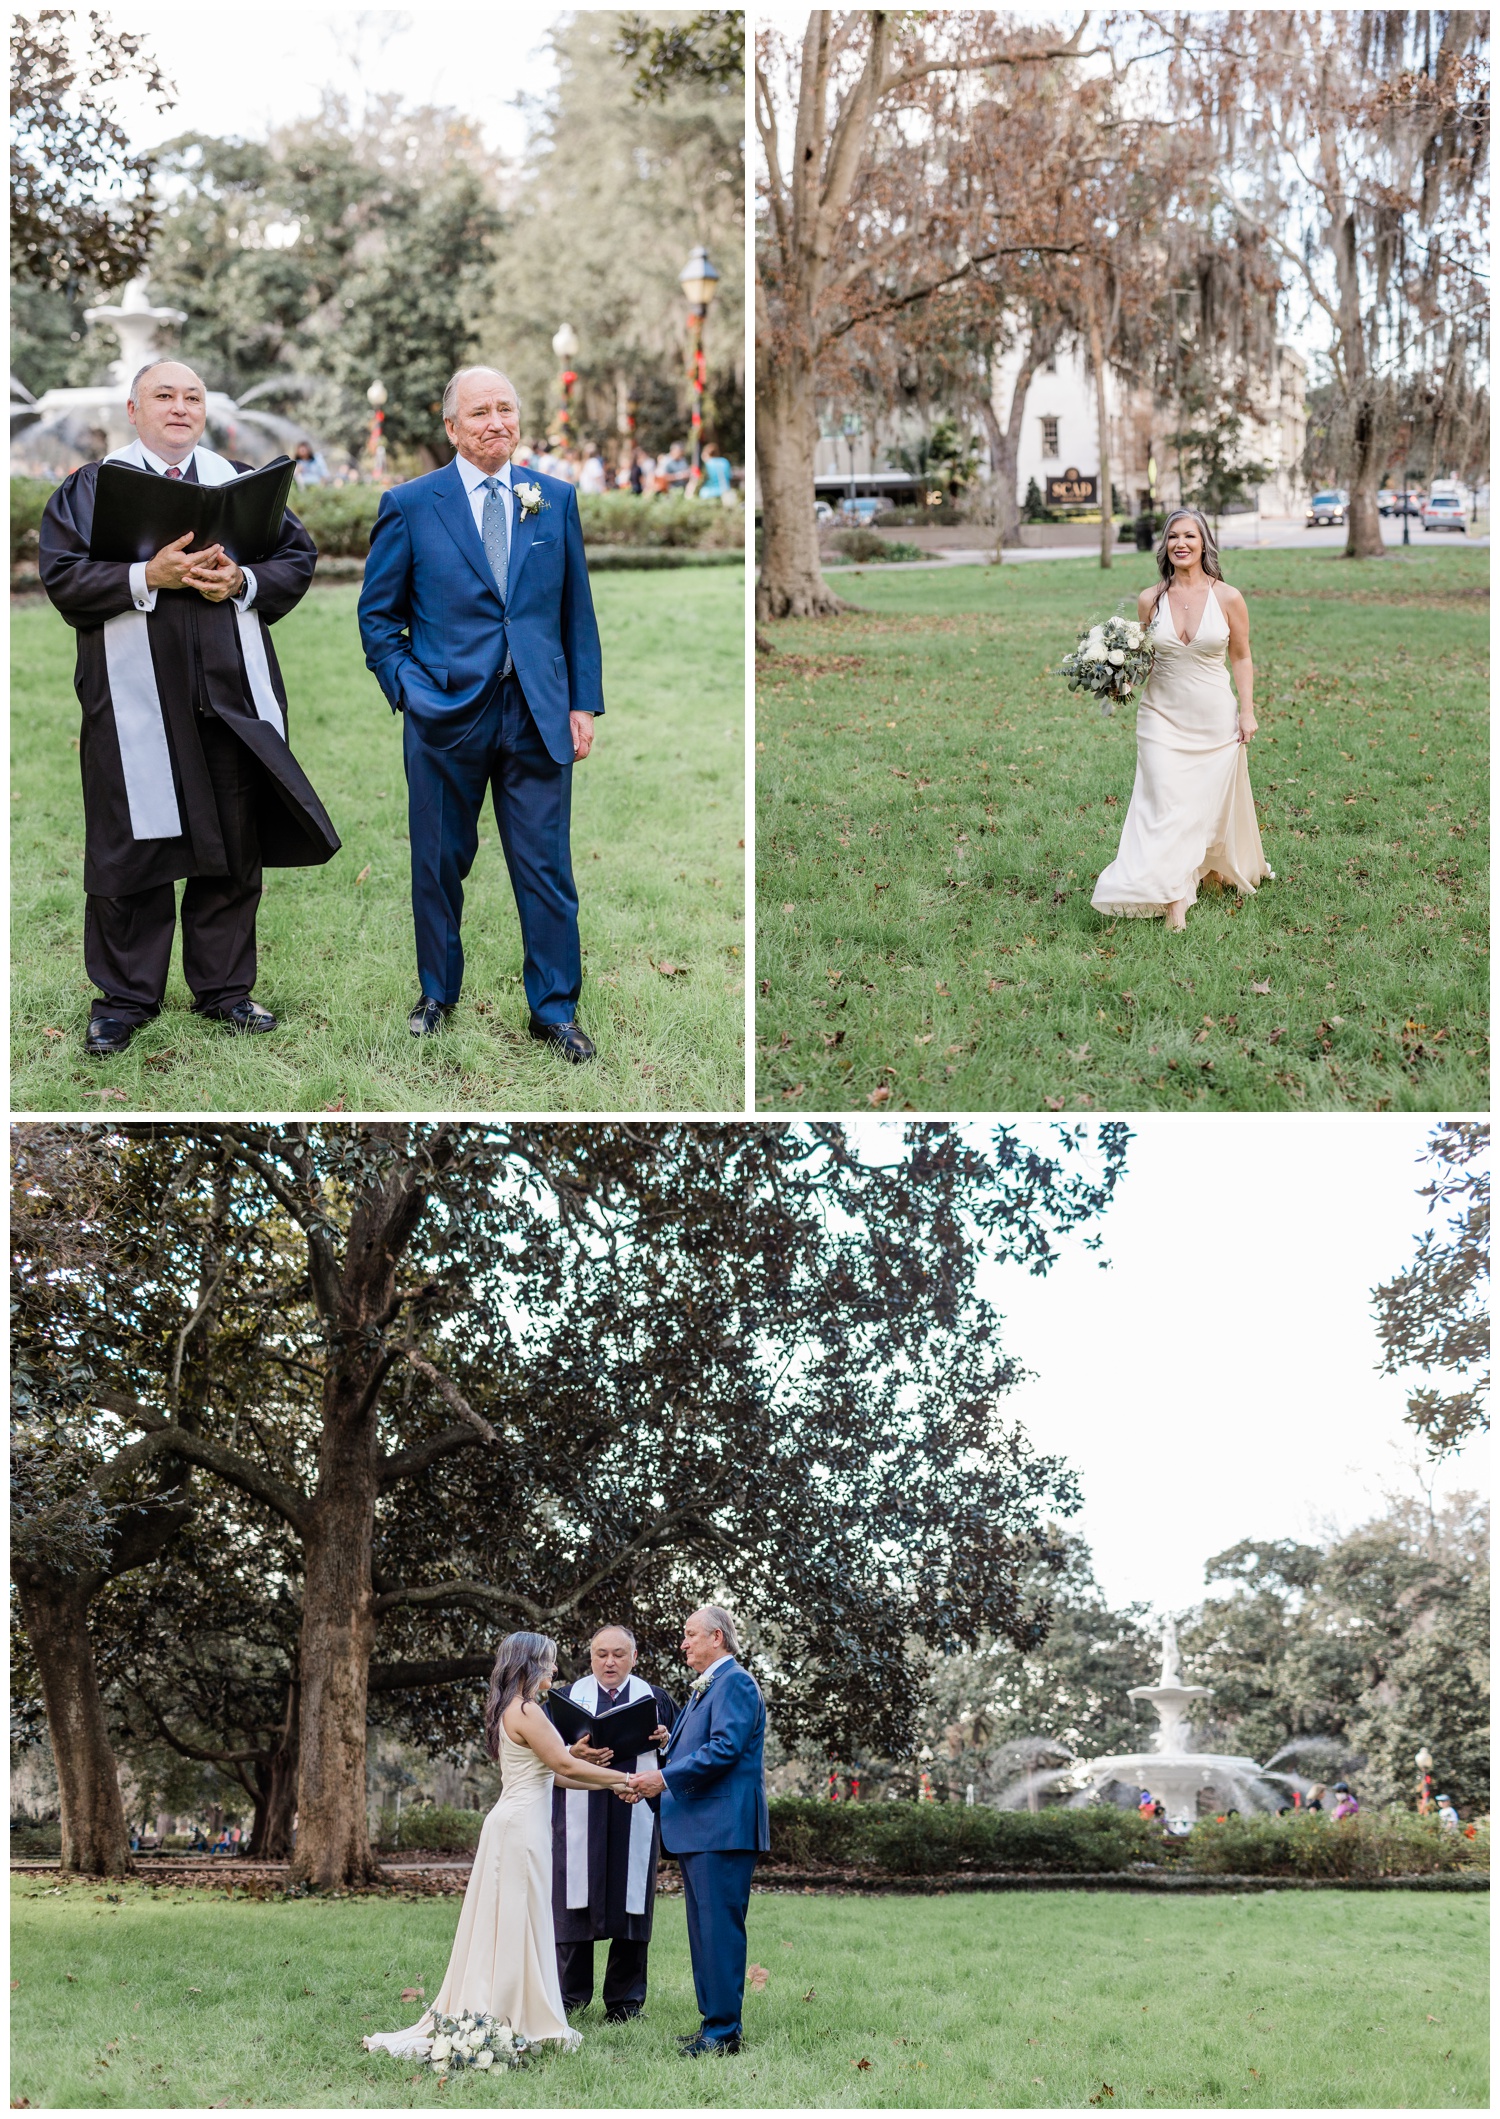 Elopement at The Fountain - officiating by Reverend Joe